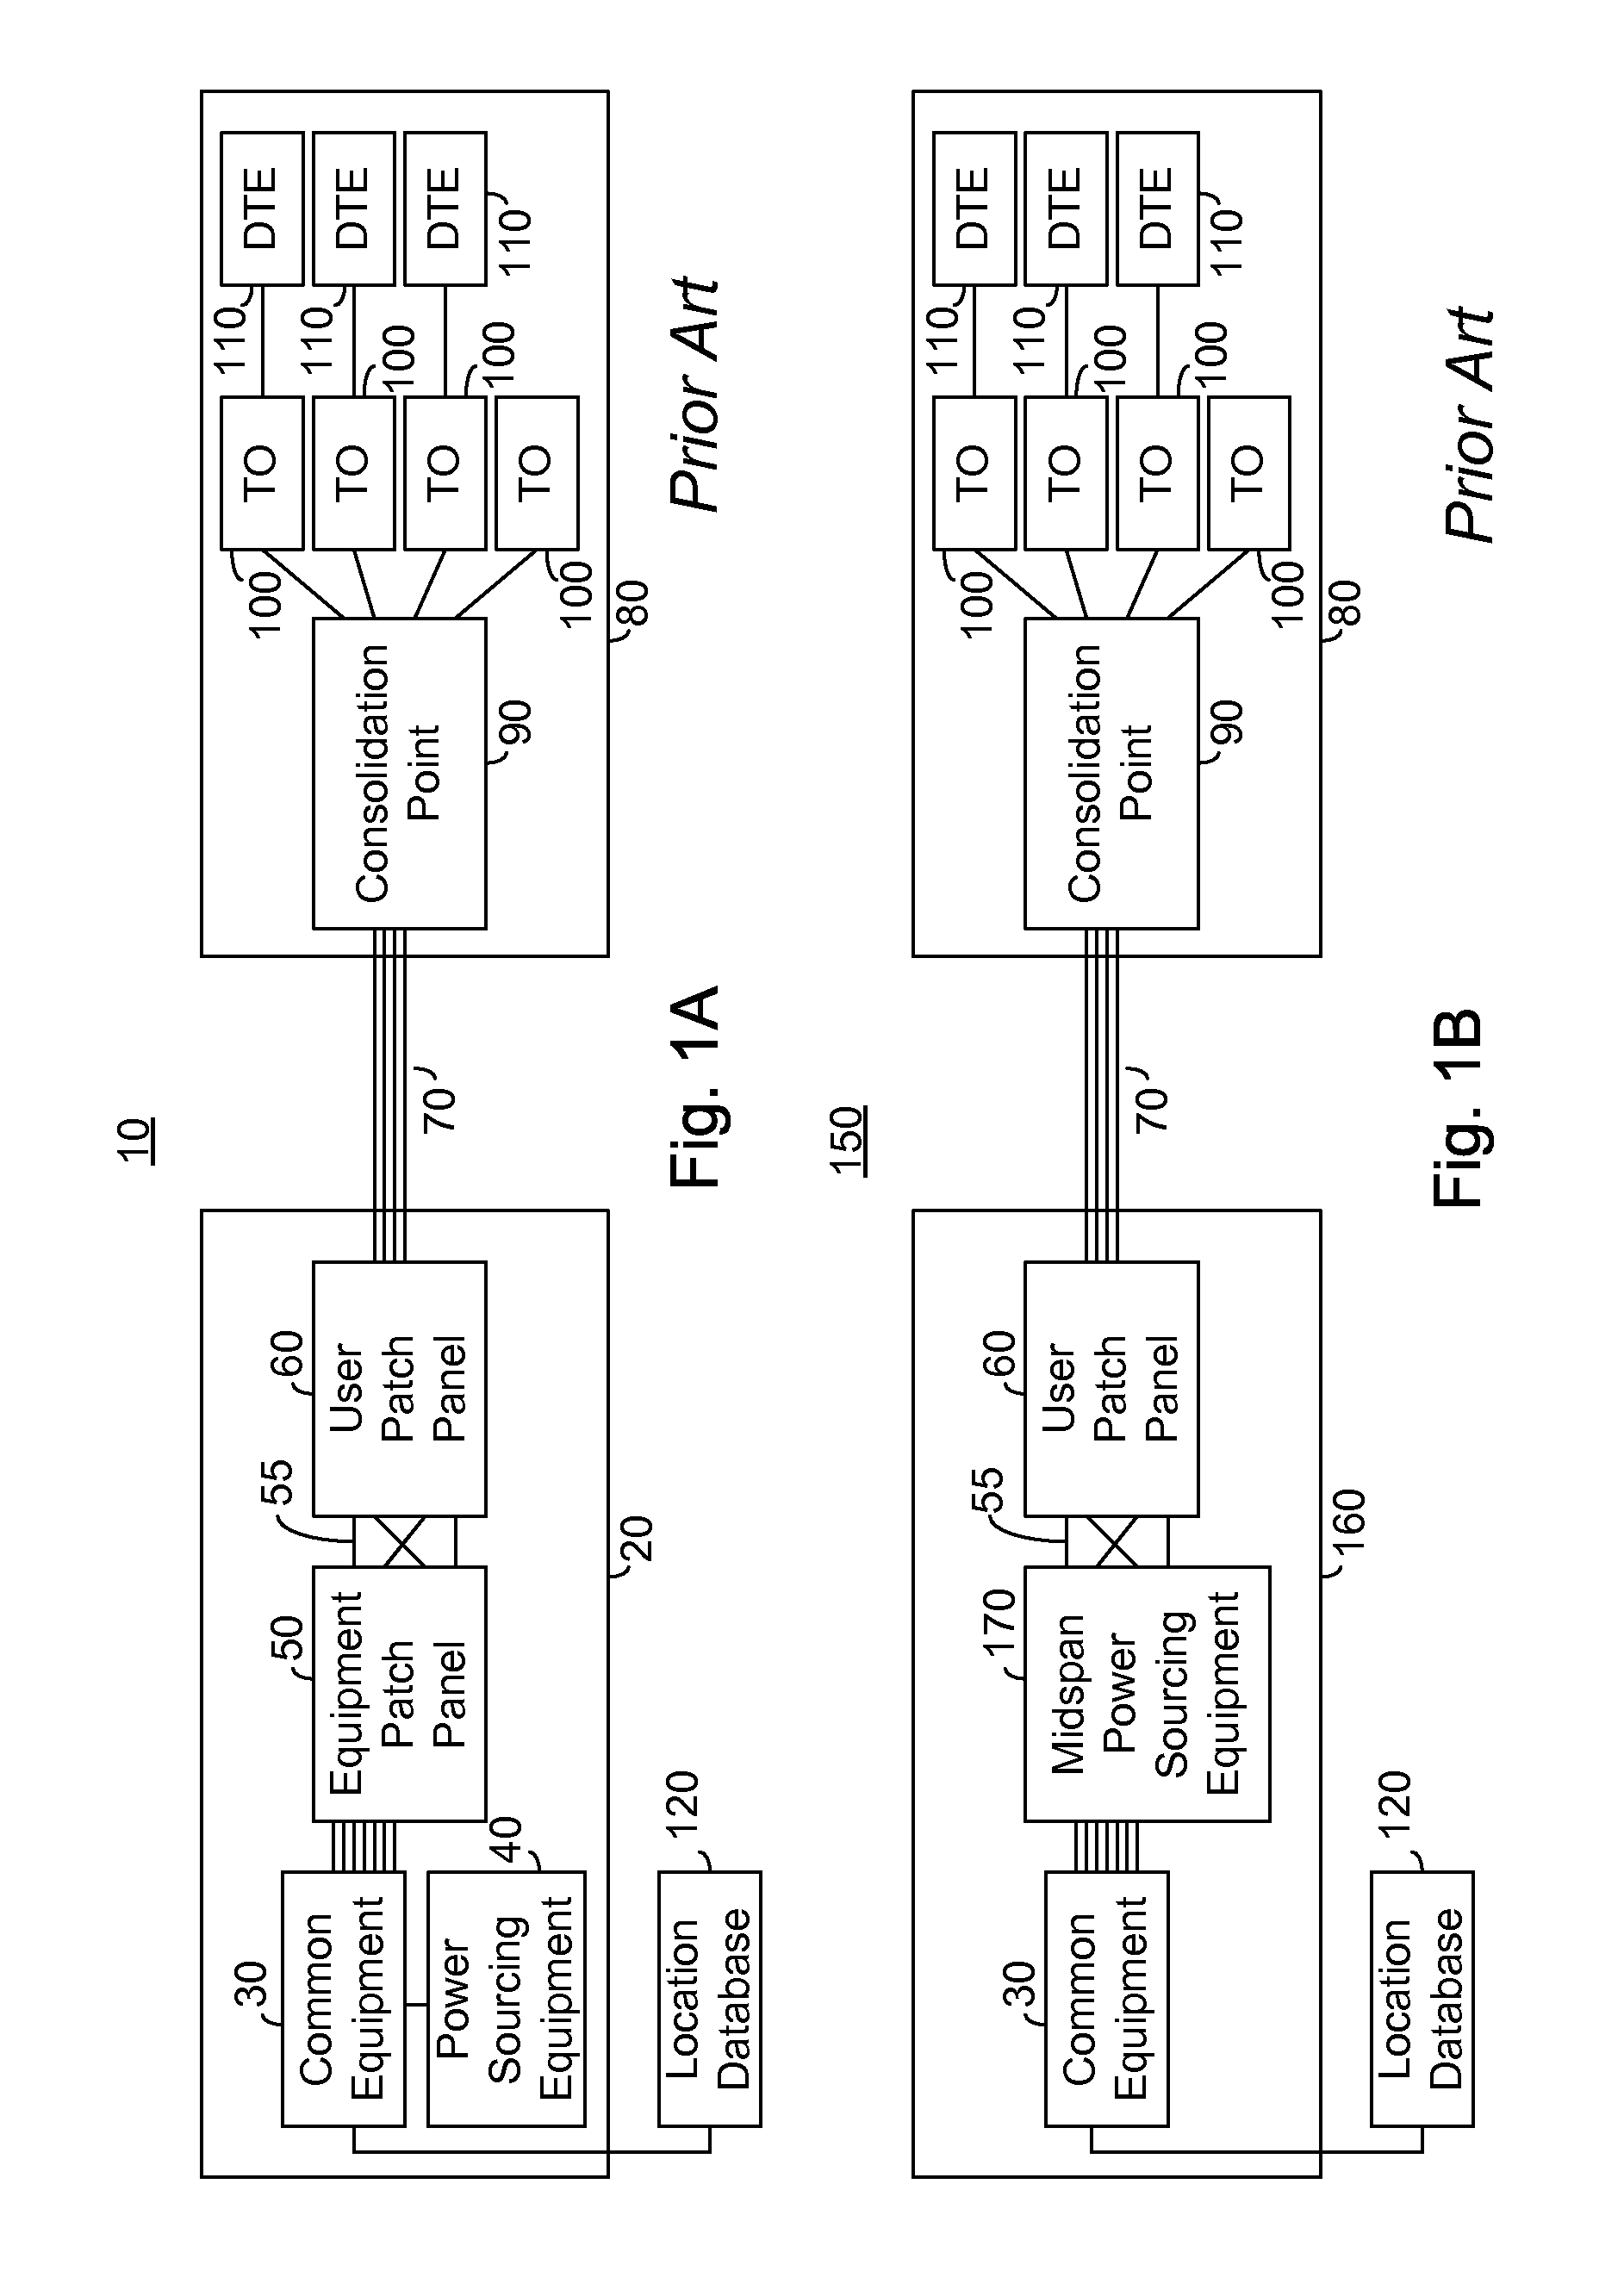 System and Method for Location Identification